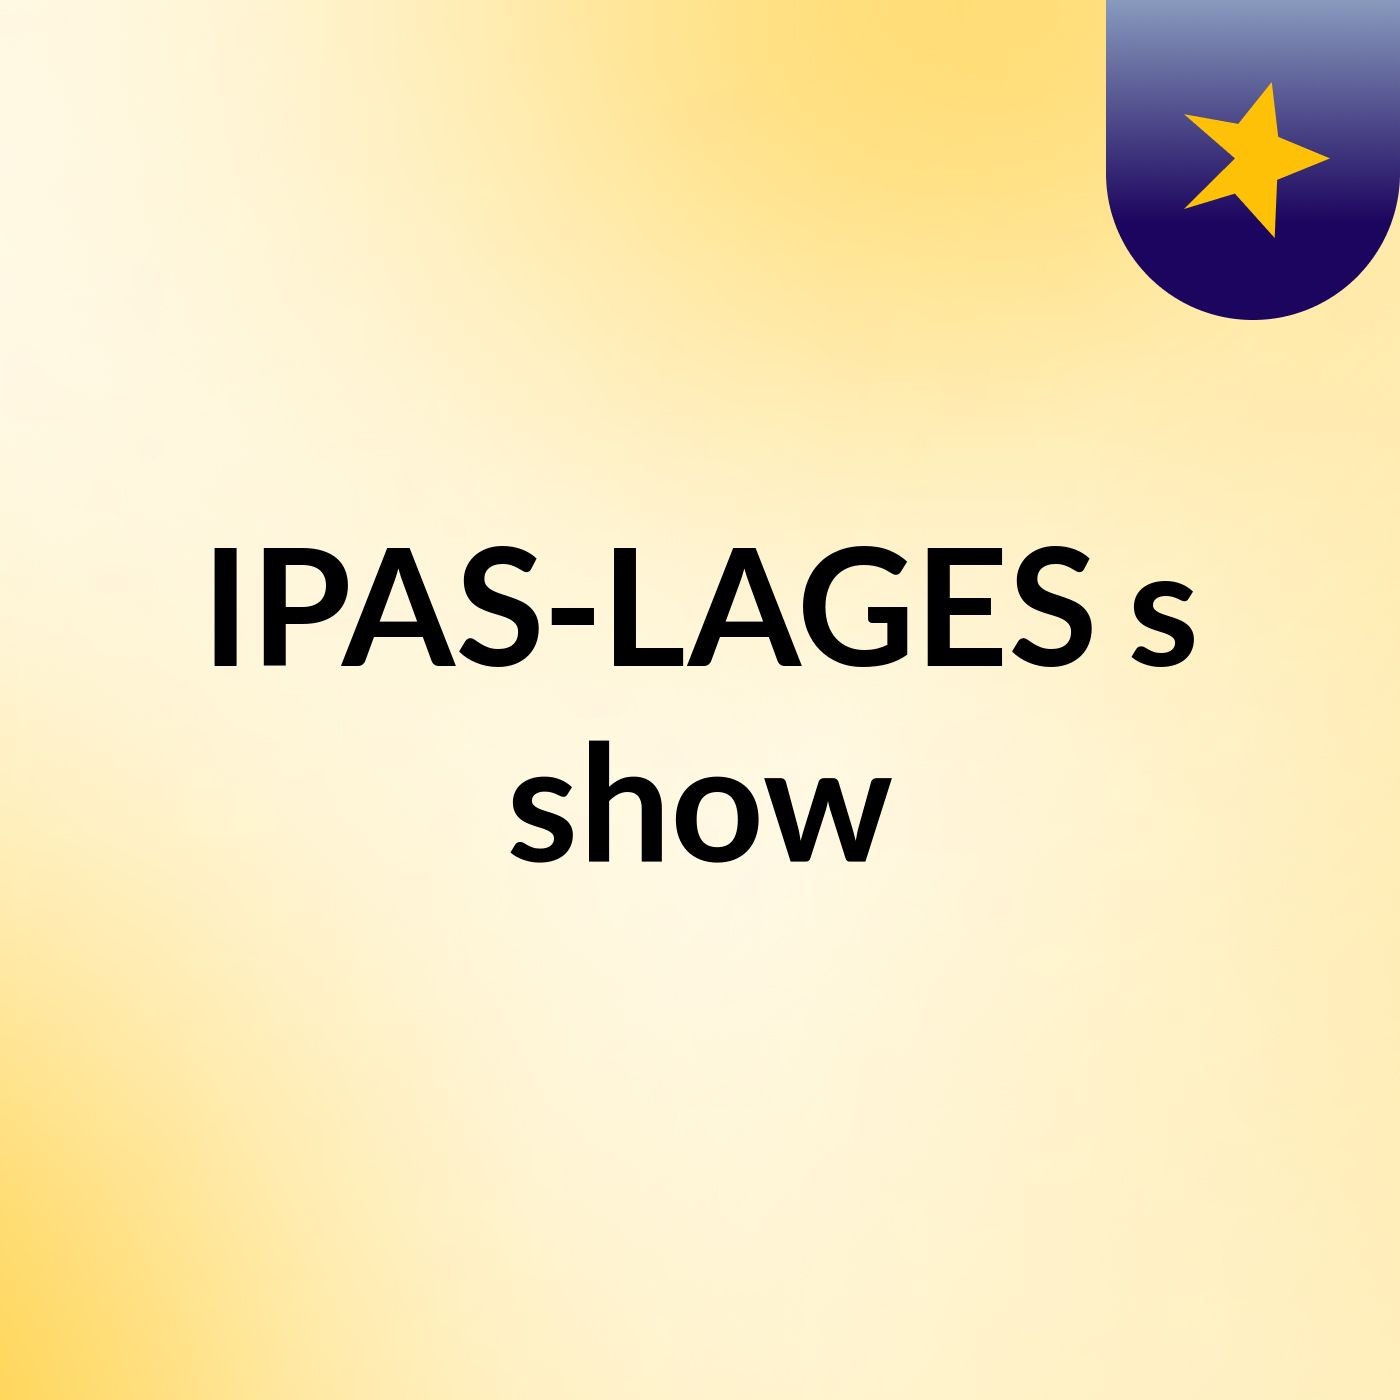 IPAS-LAGES's show